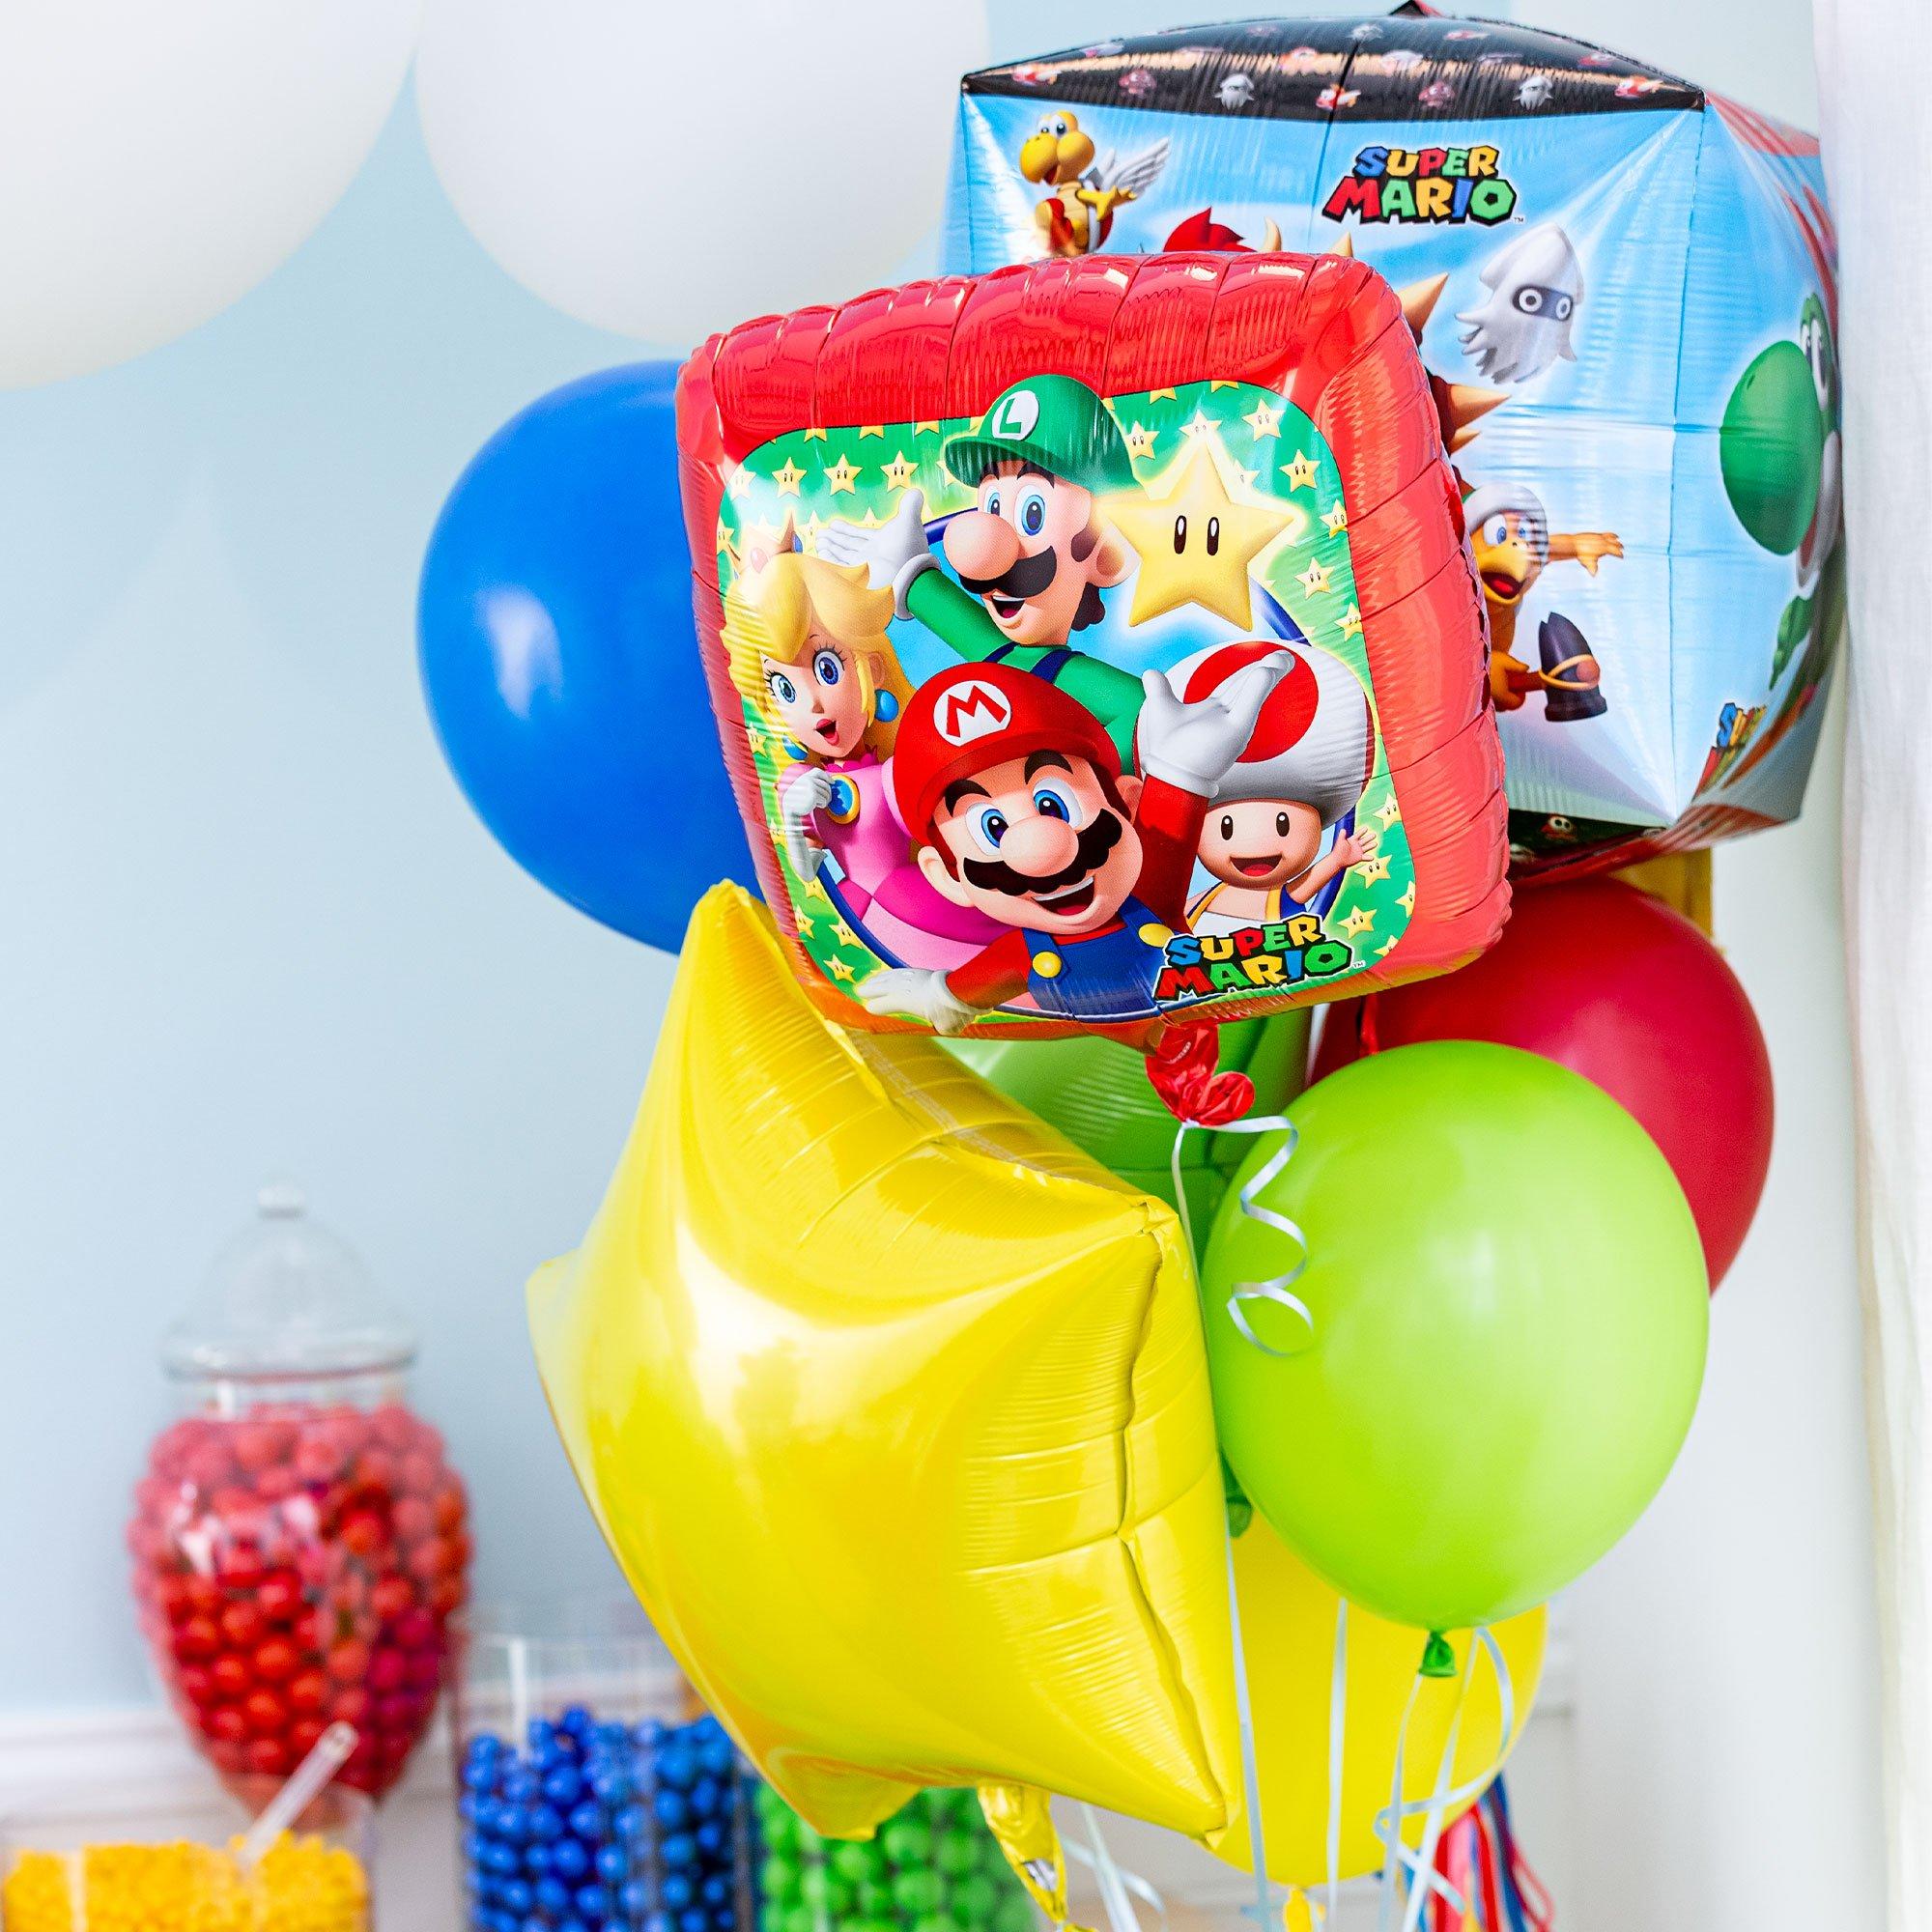 Super Mario Balloon 17in x 17in | Party City